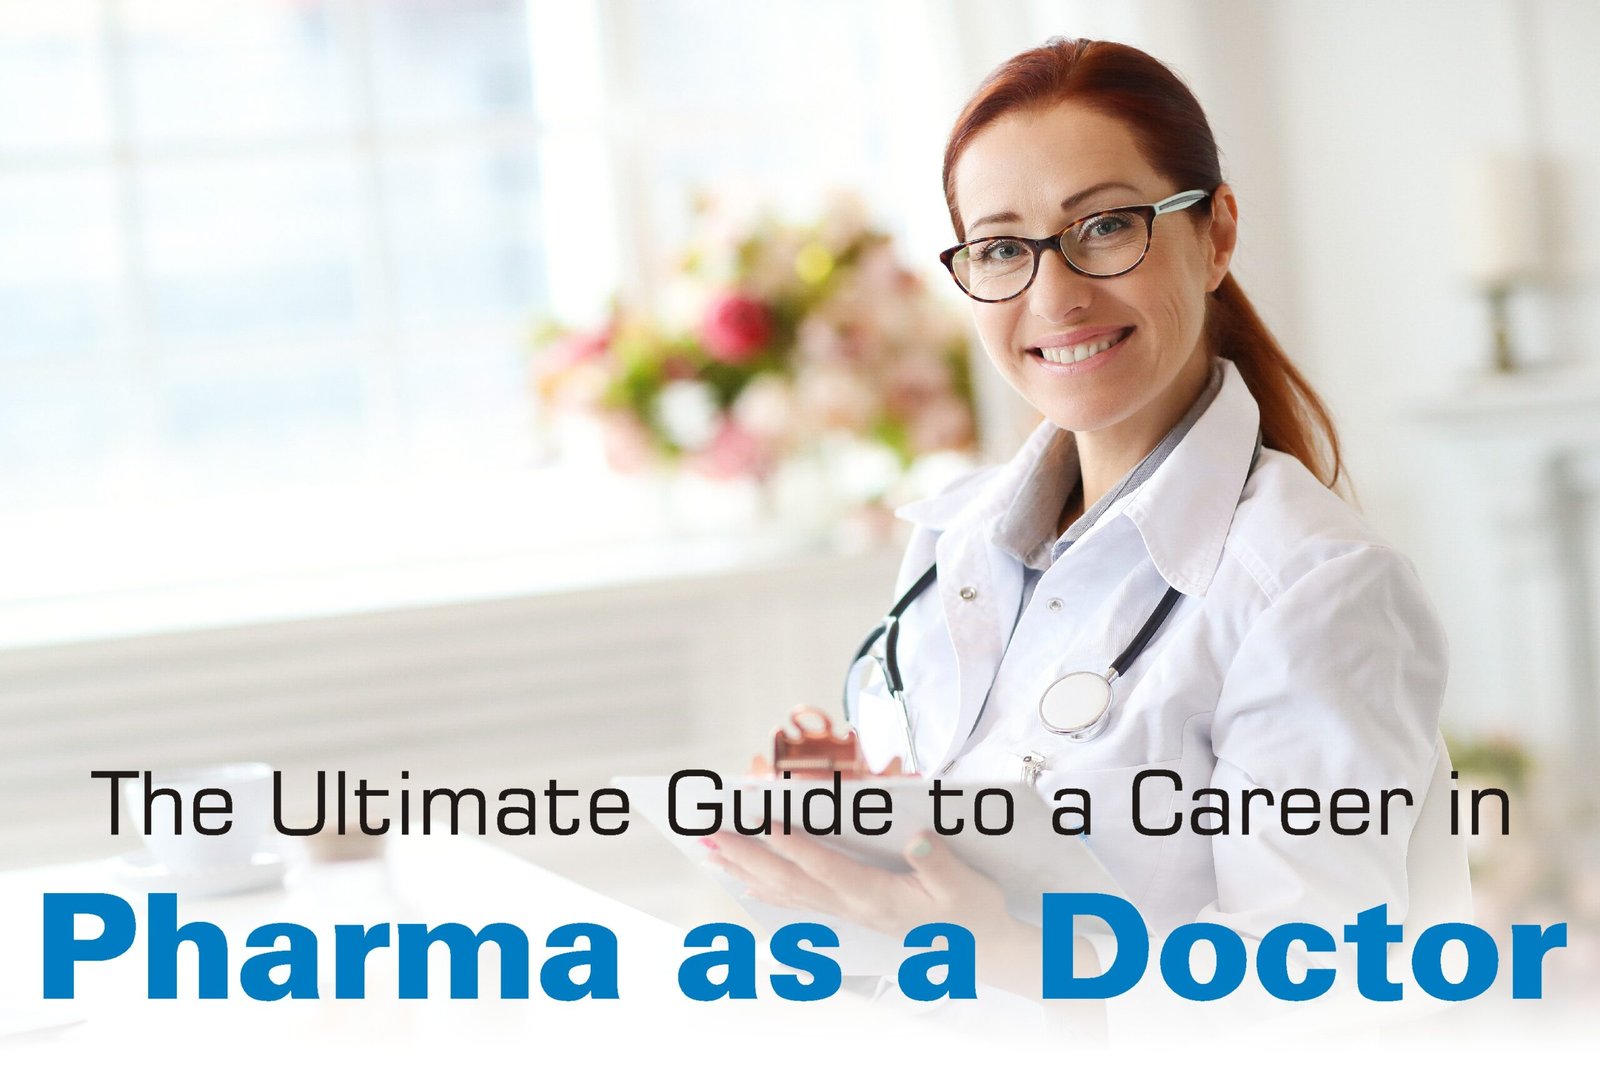 Complete guide on developing a career in Pharma Industry as a doctor!